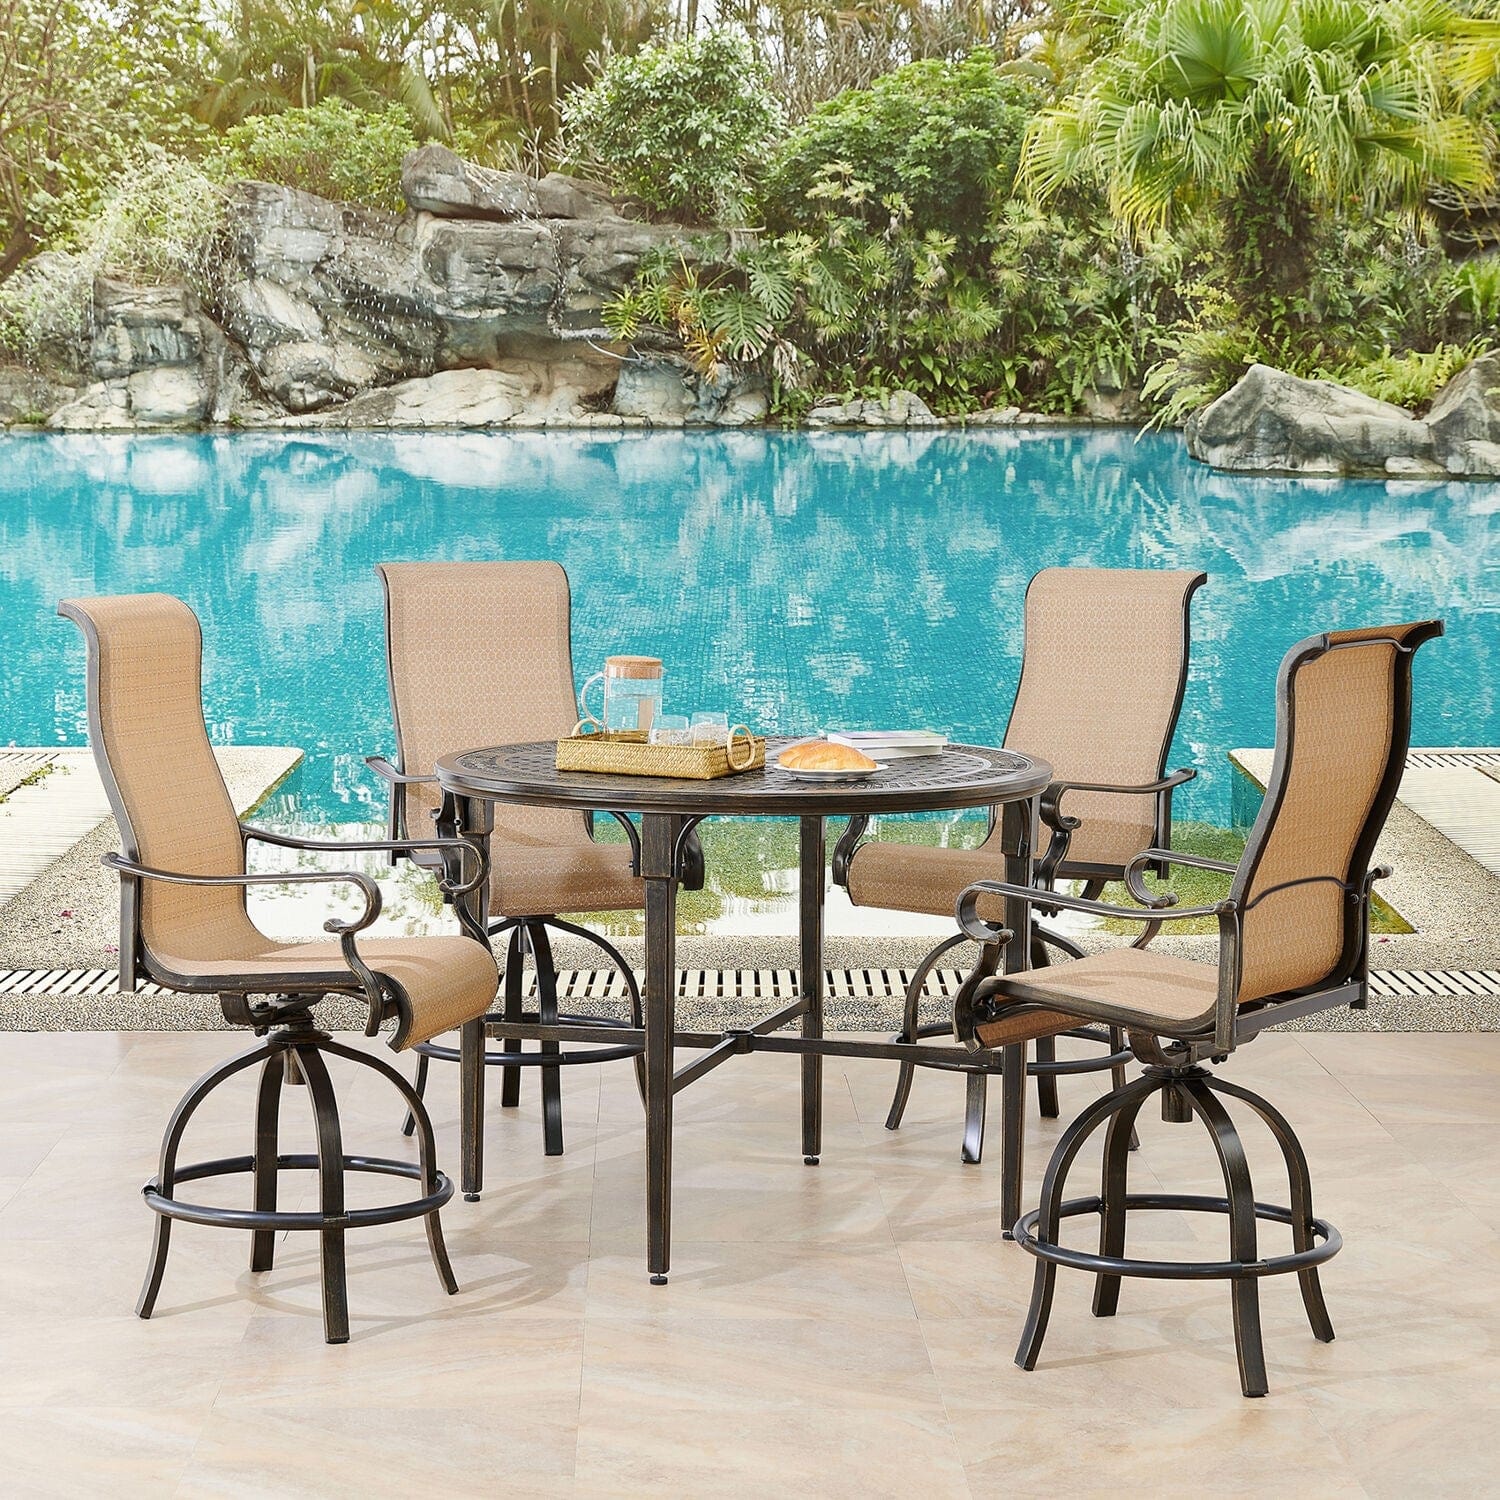 Hanover Outdoor Dining Set Hanover Brigantine 5-Piece Outdoor High-Dining Set with 4 Contoured-Sling Swivel Chairs and a 50-In. Round Cast-Top Table - BRIGDN5PCBR